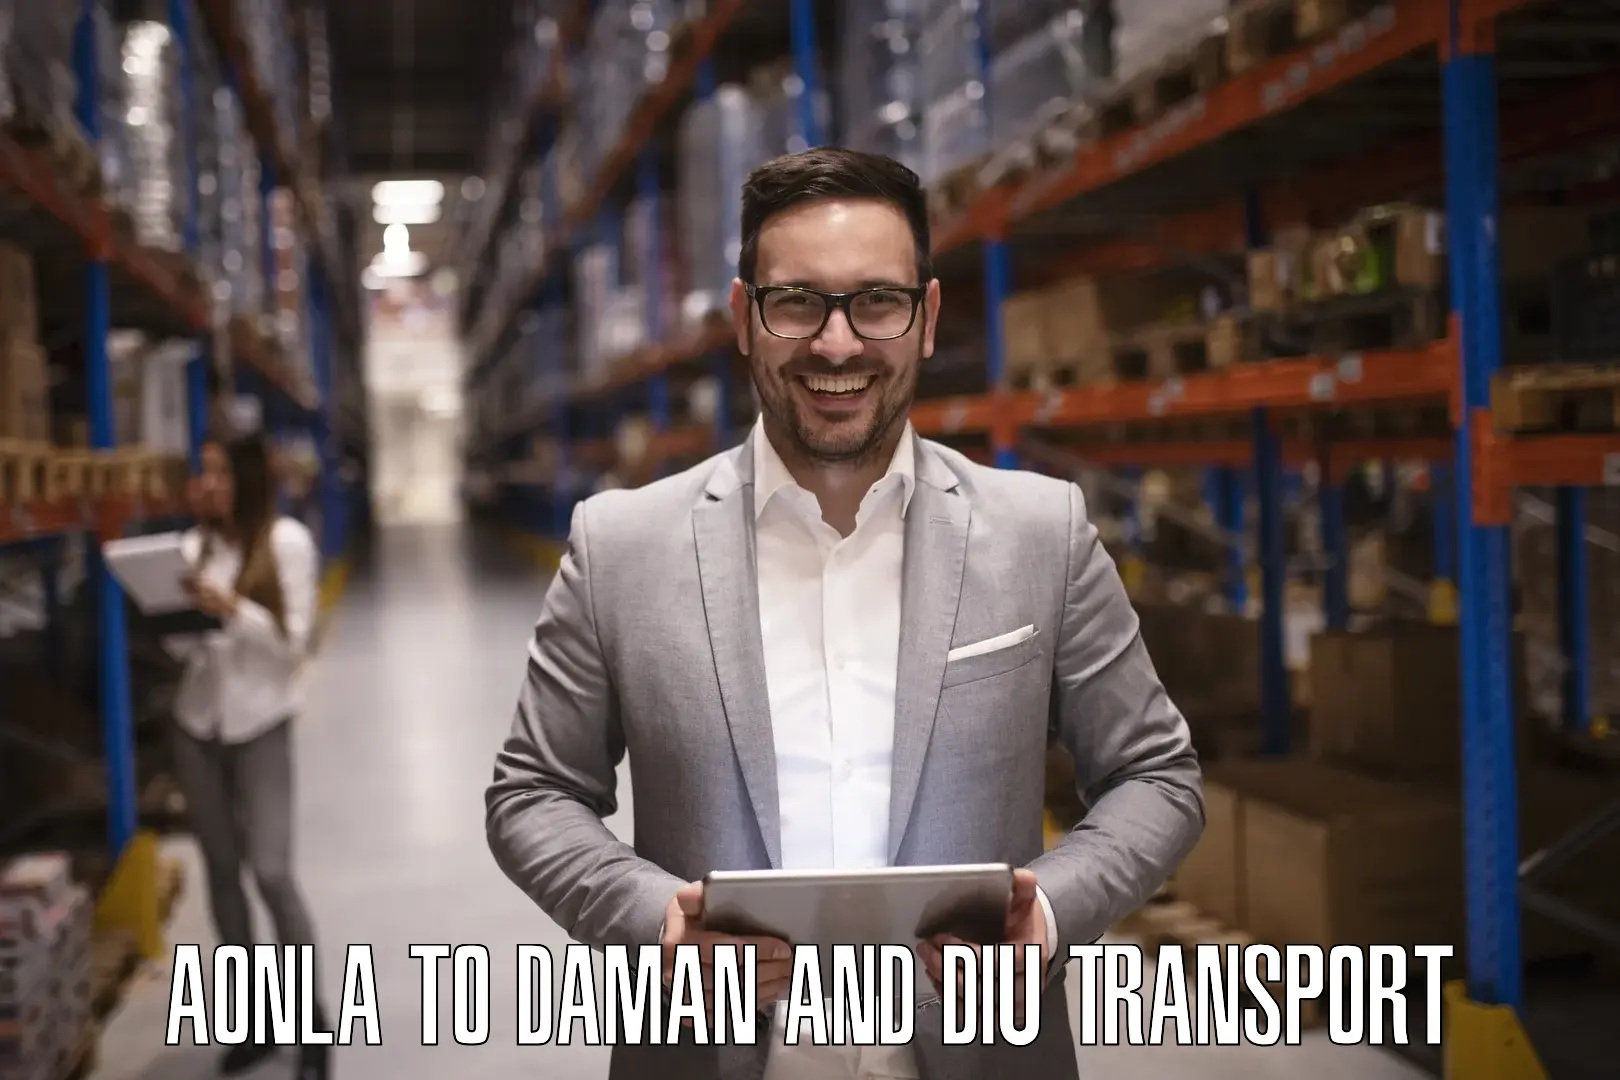 Transport shared services Aonla to Daman and Diu